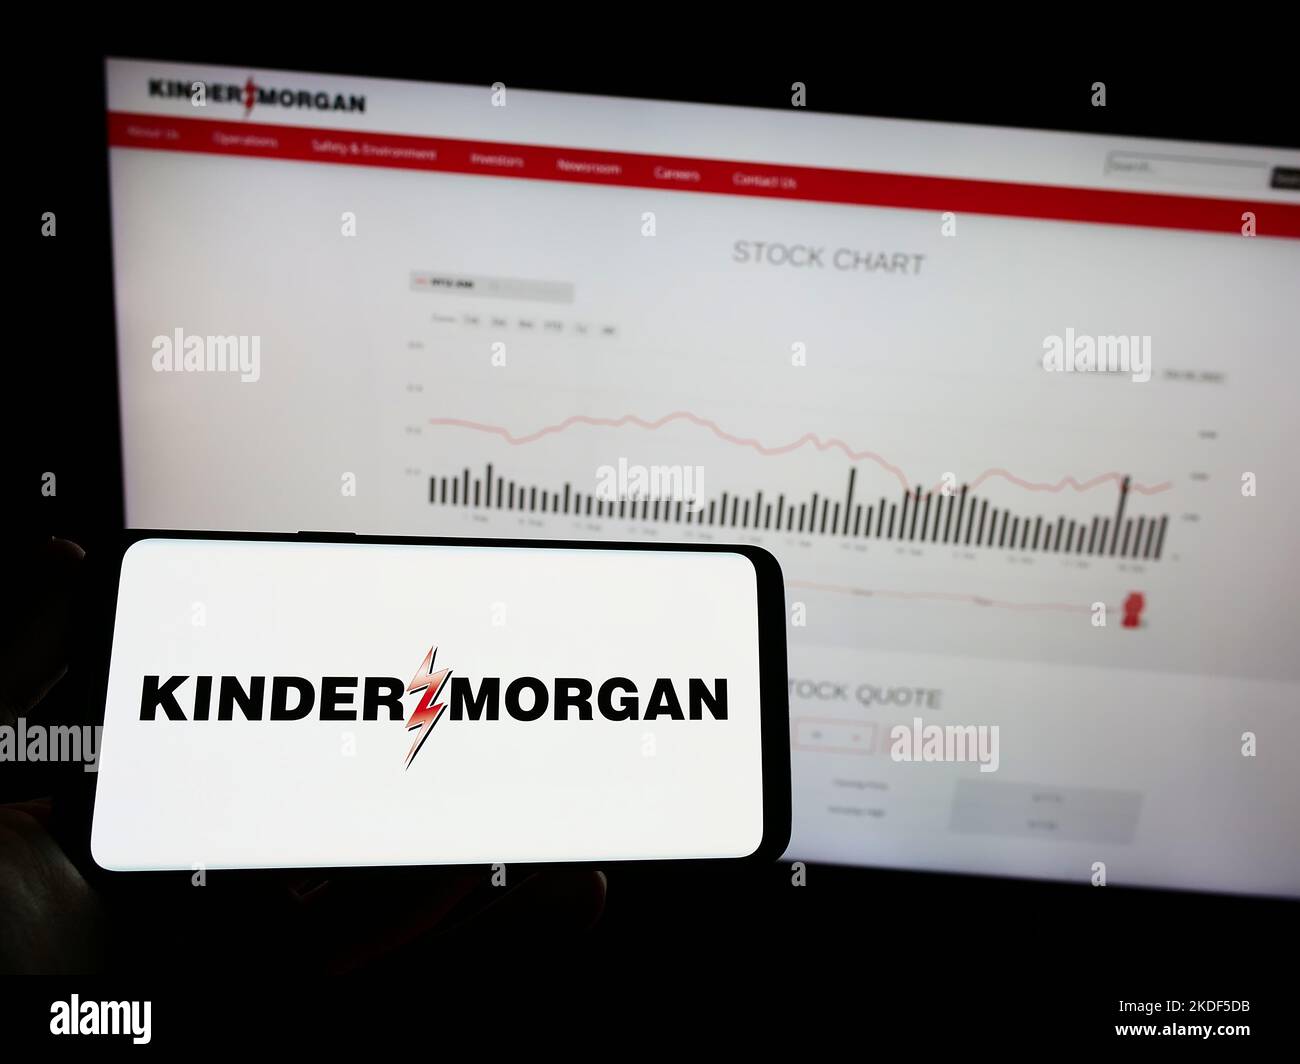 Person holding mobile phone with logo of American energy company Kinder Morgan Inc. on screen in front of web page. Focus on phone display. Stock Photo